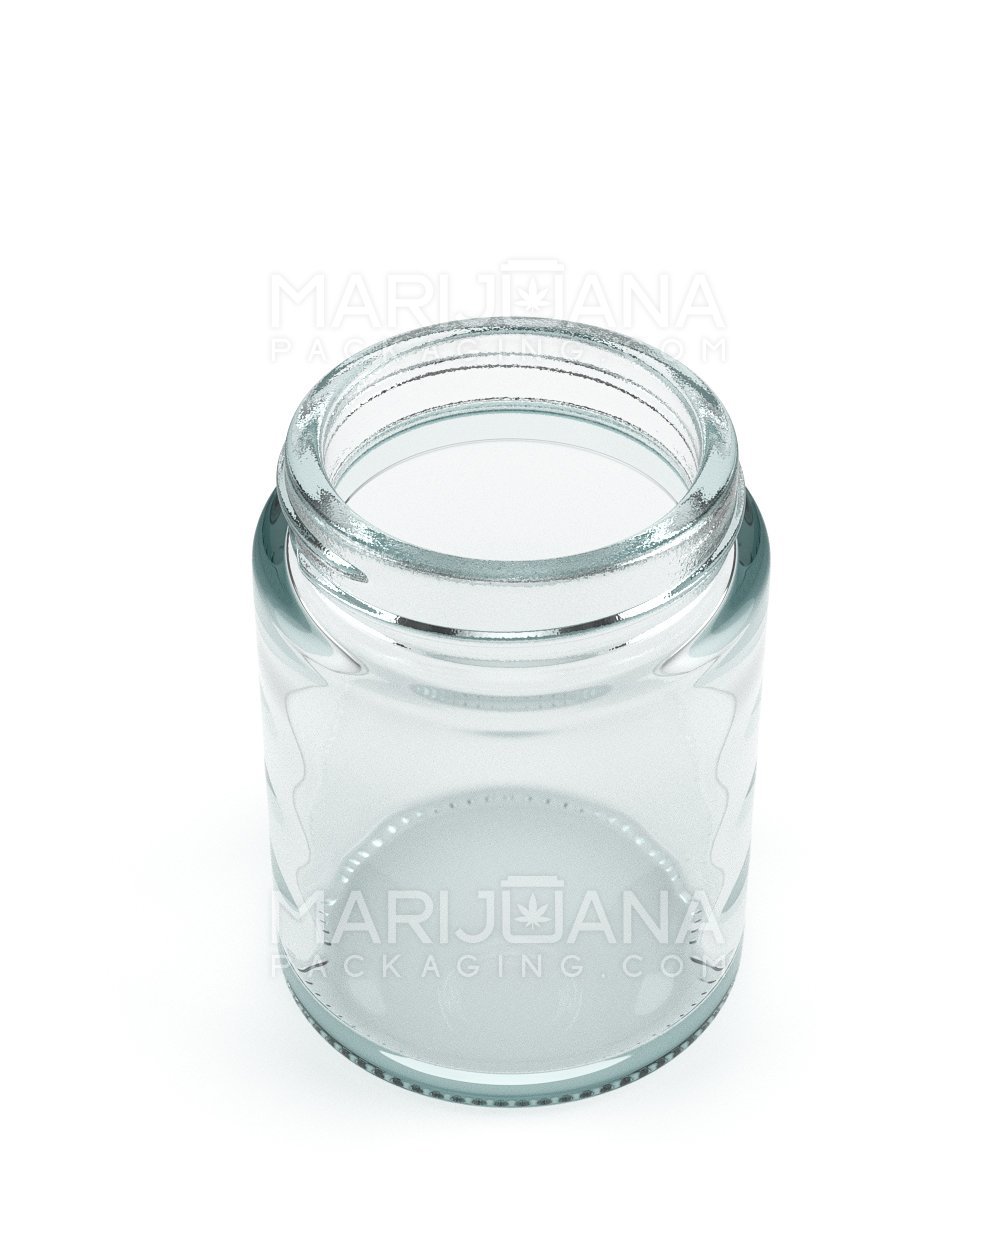 Straight Sided Clear Glass Jars | 50mm - 4oz - 100 Count - 2